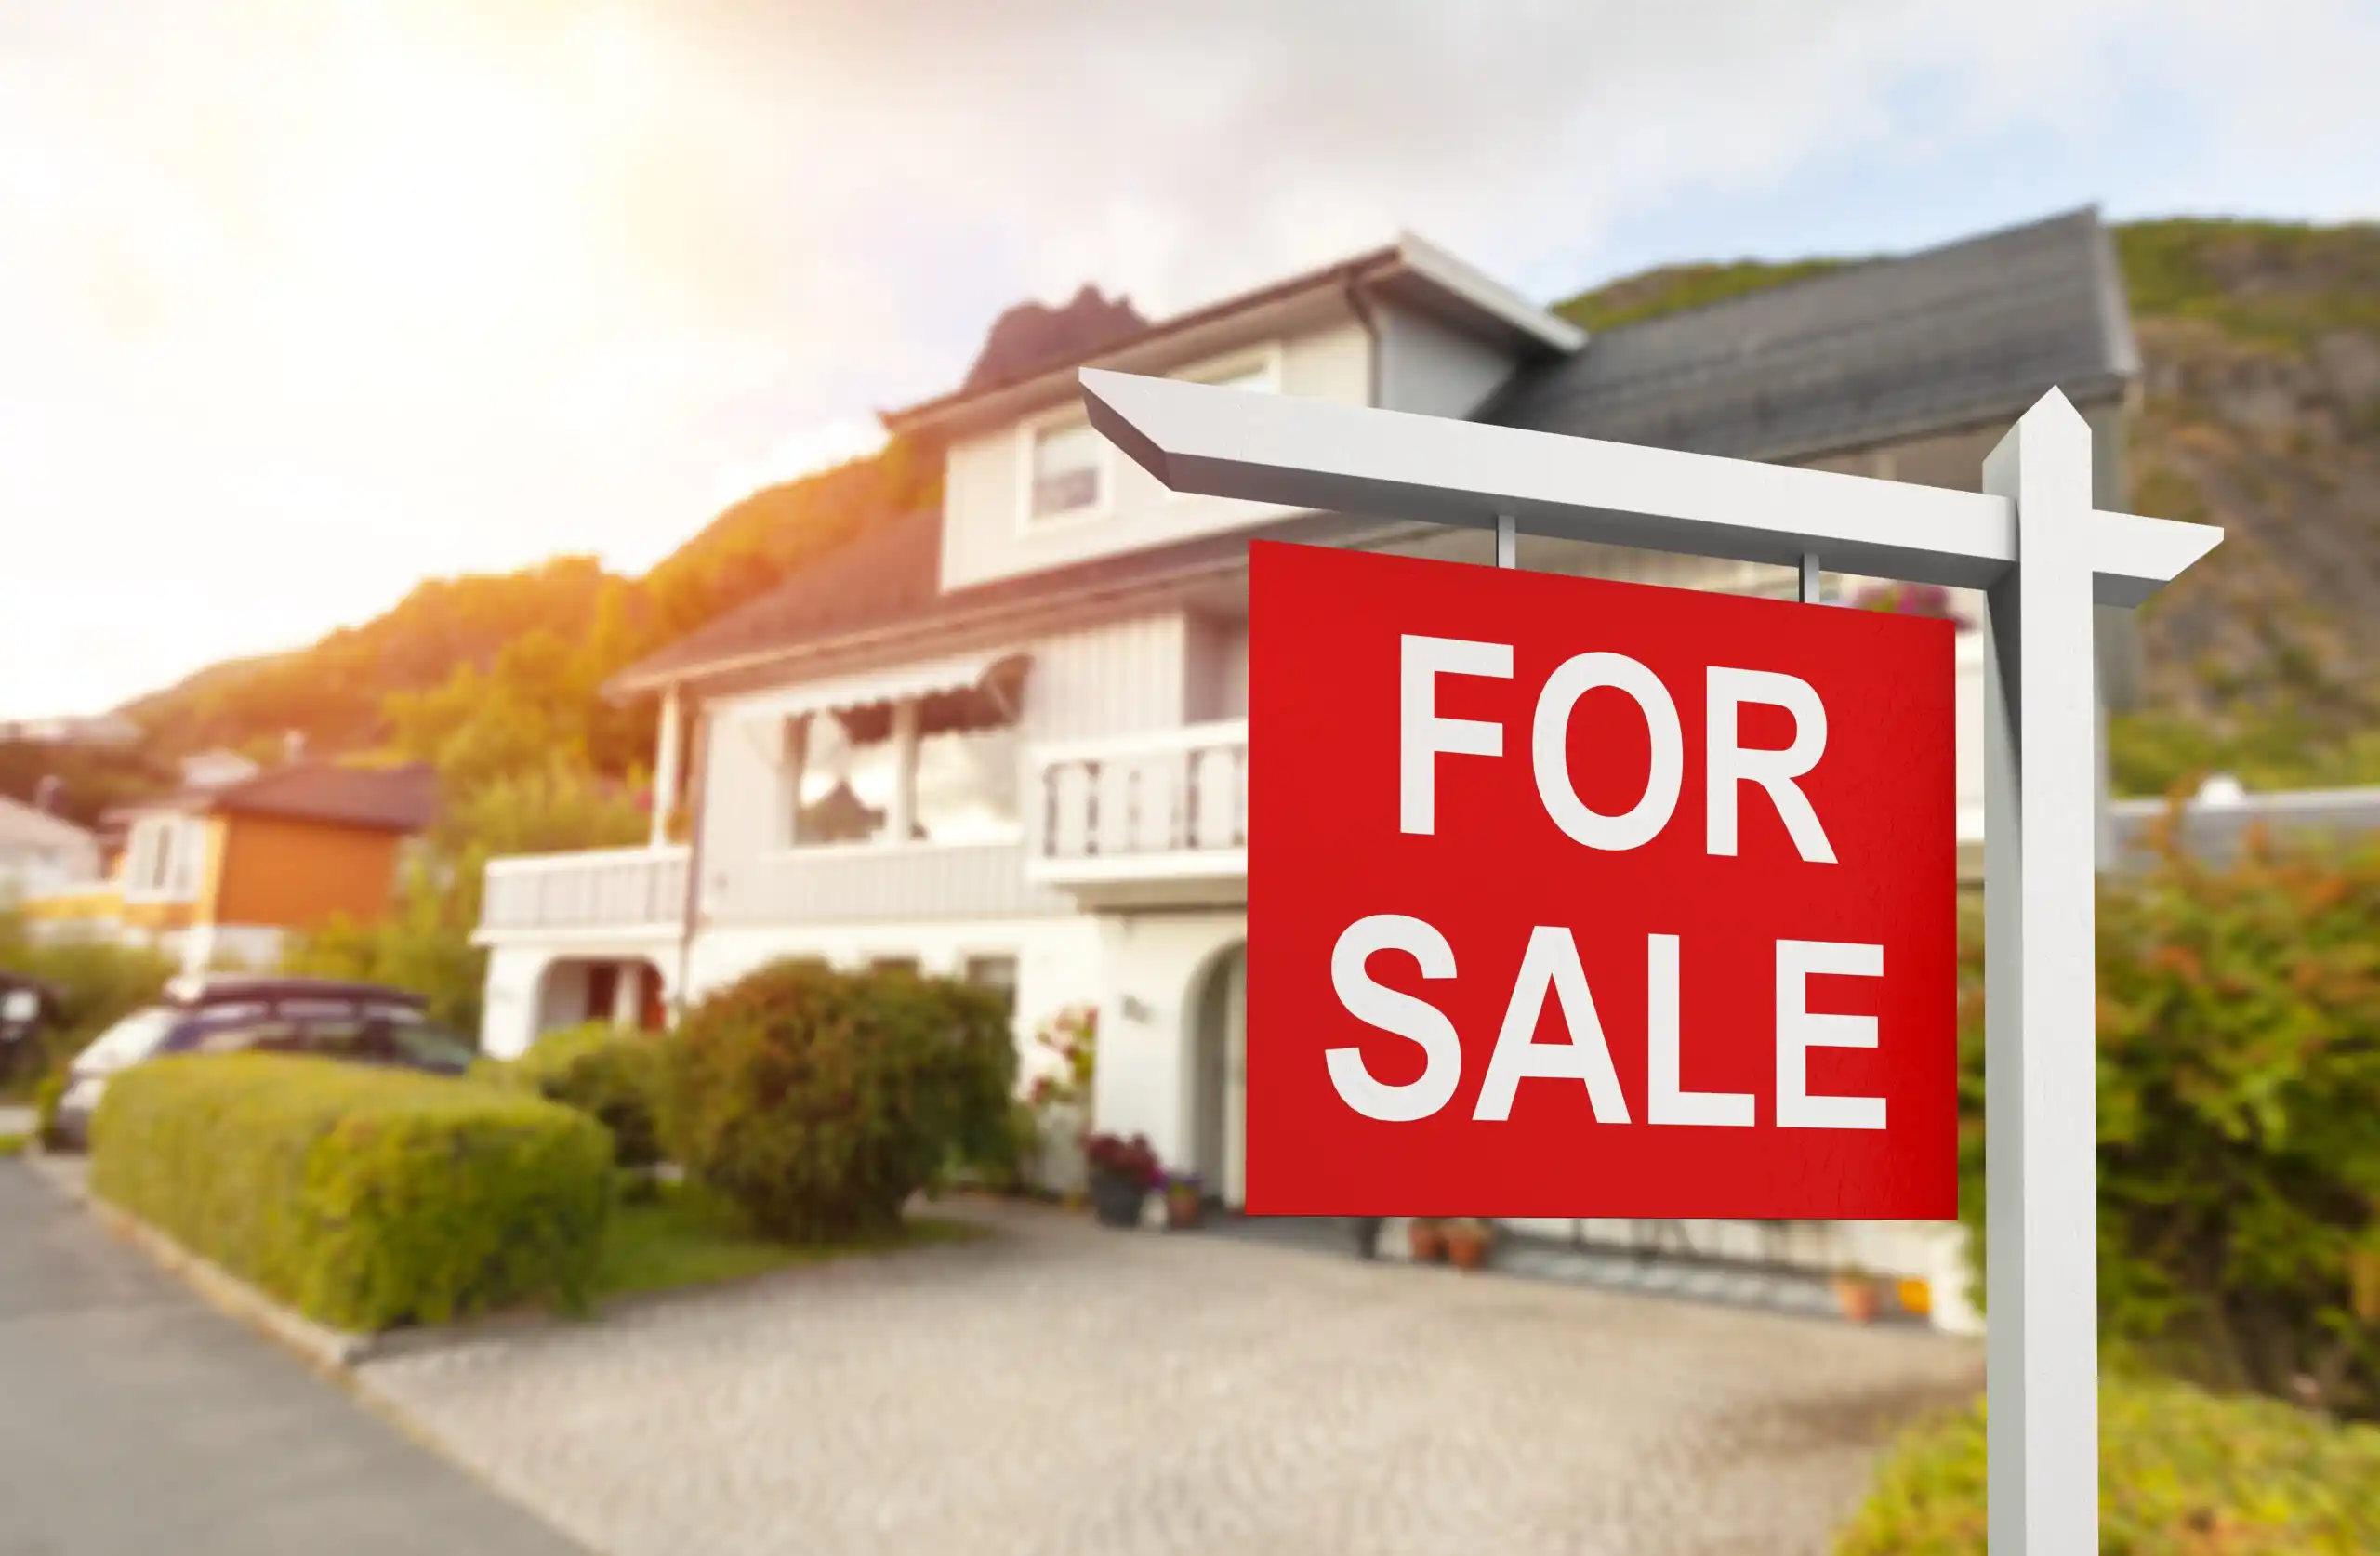 Home Selling Checklist: What To Do Before Selling Your House